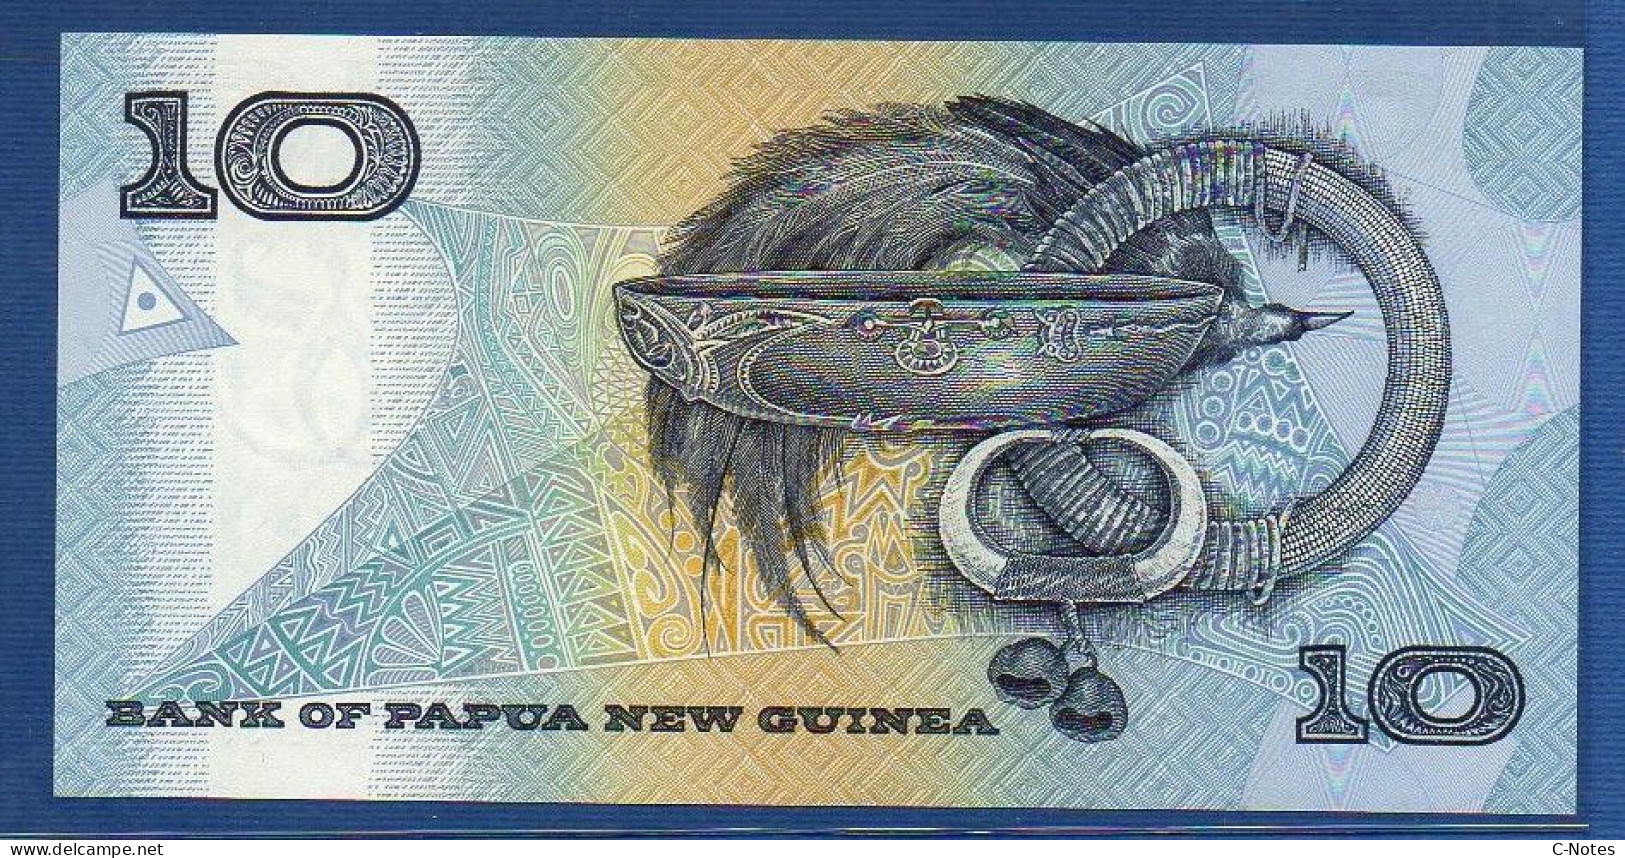 PAPUA NEW GUINEA - P. 9b – 10 KINA ND (1989 - 1992) UNC, S/n NDE 390119 - Papouasie-Nouvelle-Guinée